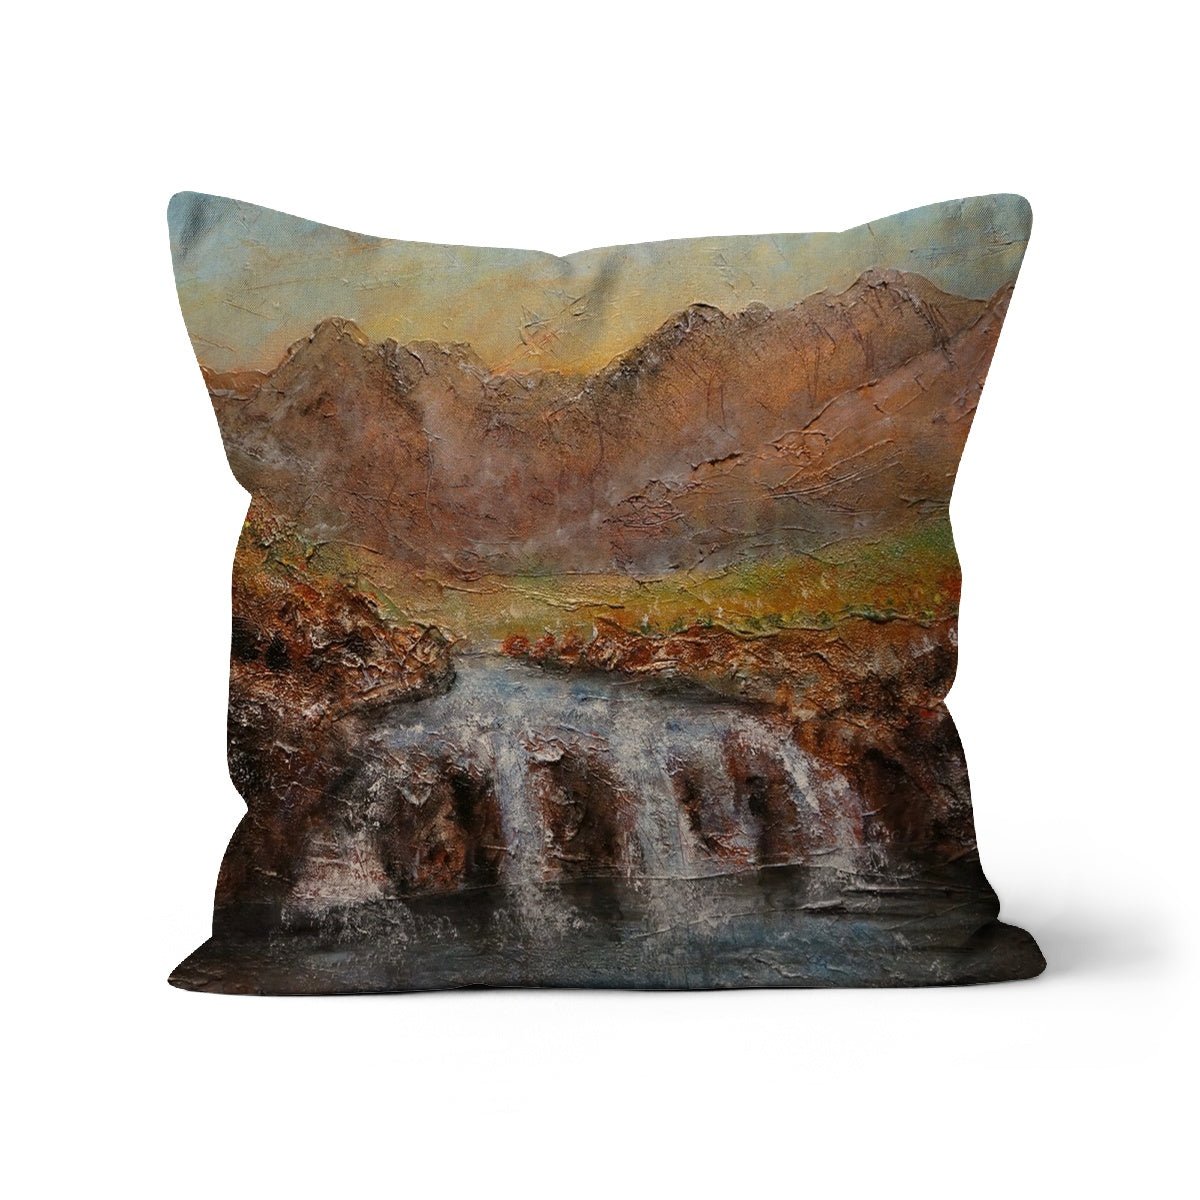 Fairy Pools Dawn Skye Art Gifts Cushion-Cushions-Skye Art Gallery-Canvas-18"x18"-Paintings, Prints, Homeware, Art Gifts From Scotland By Scottish Artist Kevin Hunter